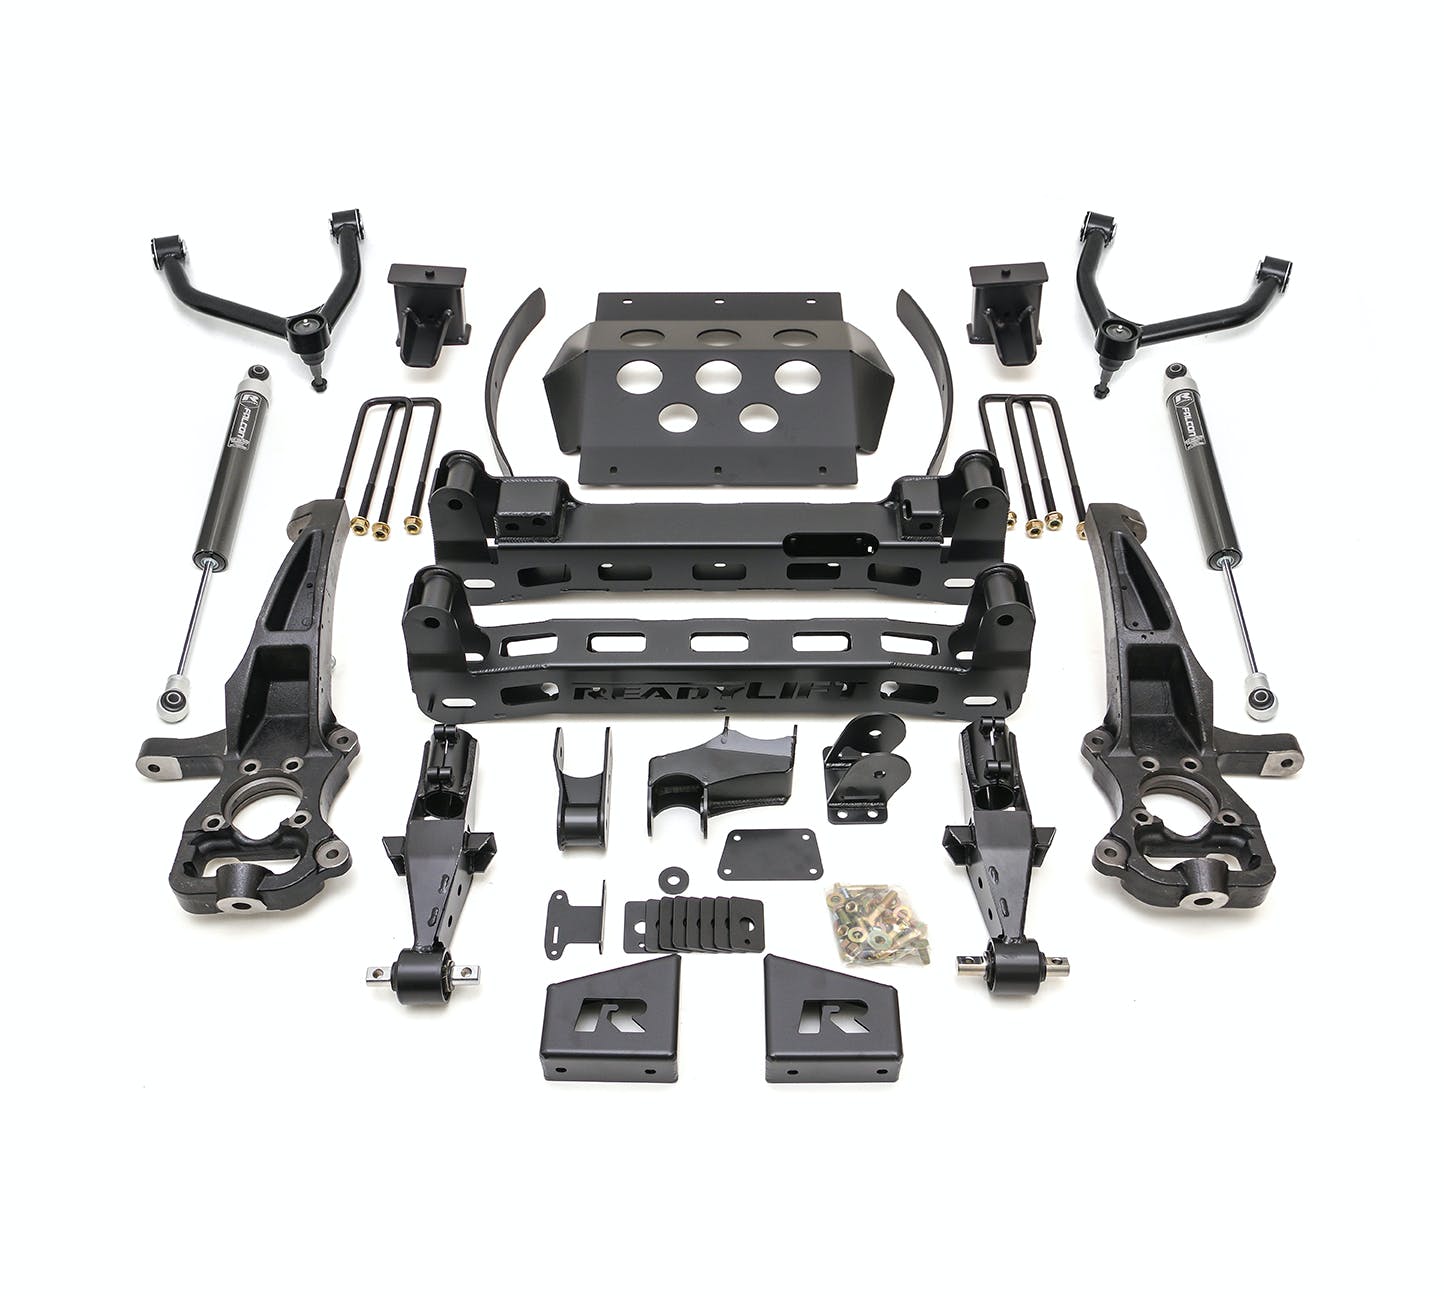 ReadyLIFT 44-39800 8" Big Lift Kit with Upper Control Arms and rear Falcon 1.1 Monotube Shocks